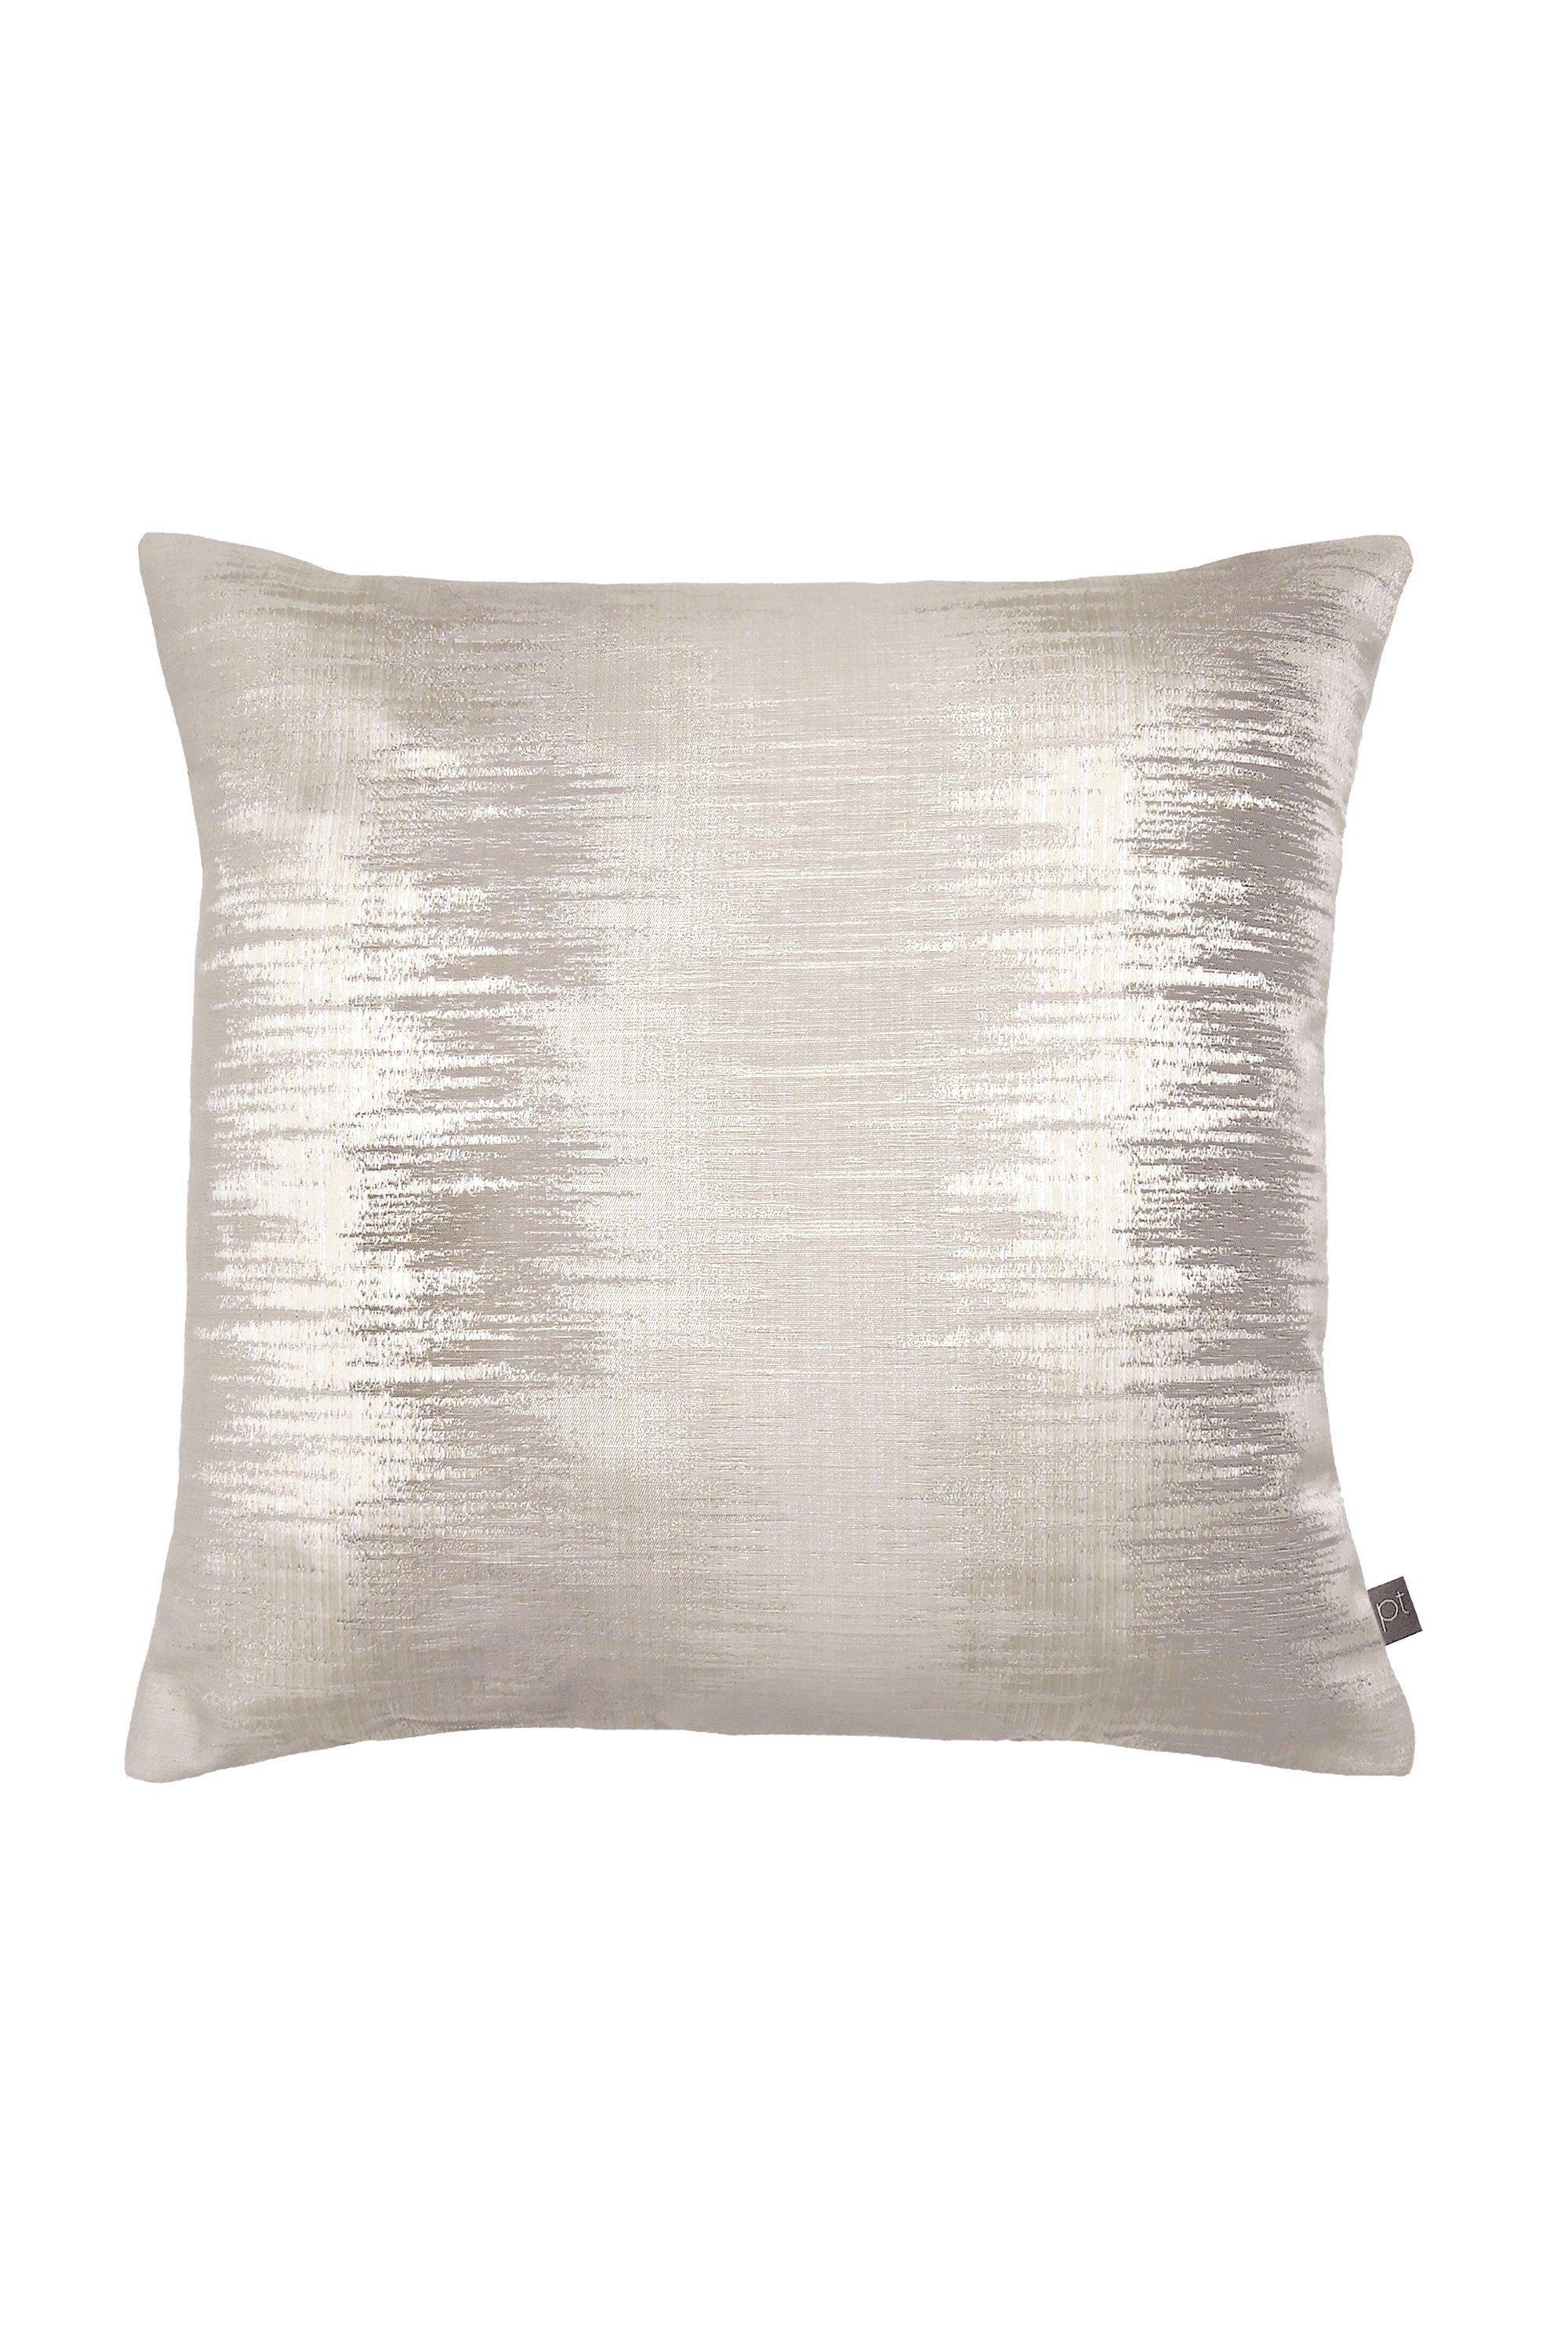 Picture of Equinox Linen Cushion